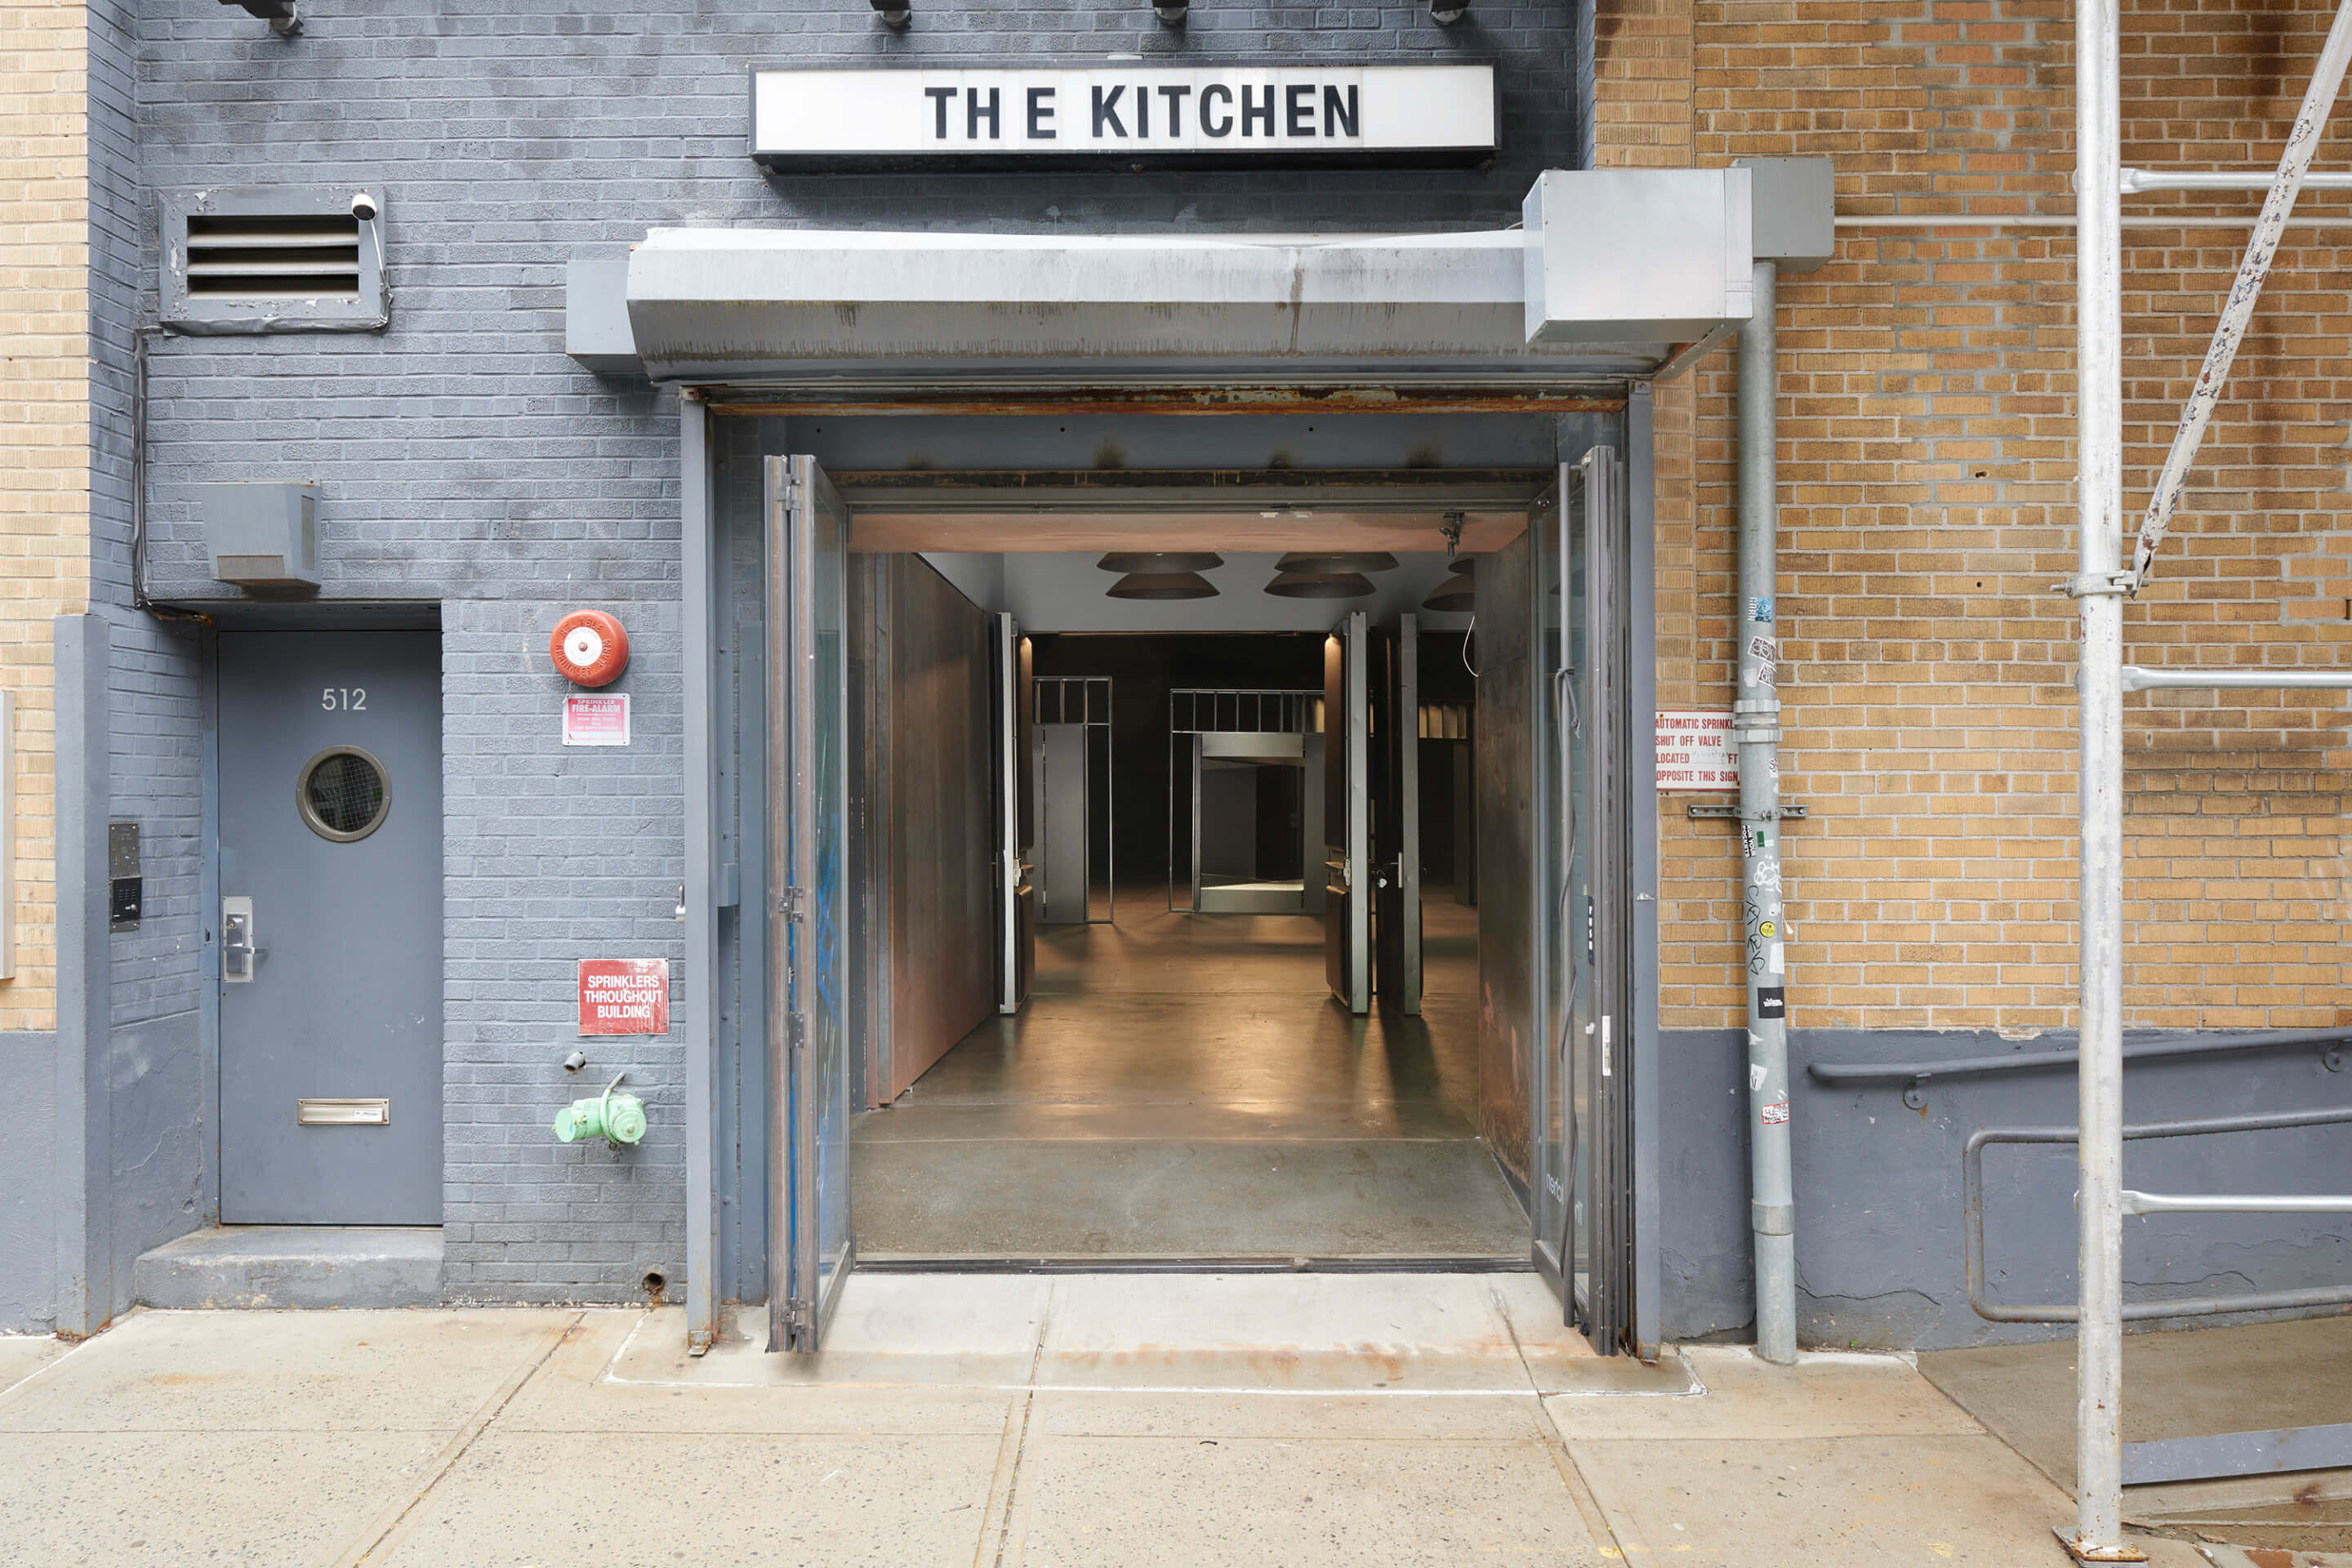 Looking into a storefront with a the kitchen sign, and the Container and Contained show within